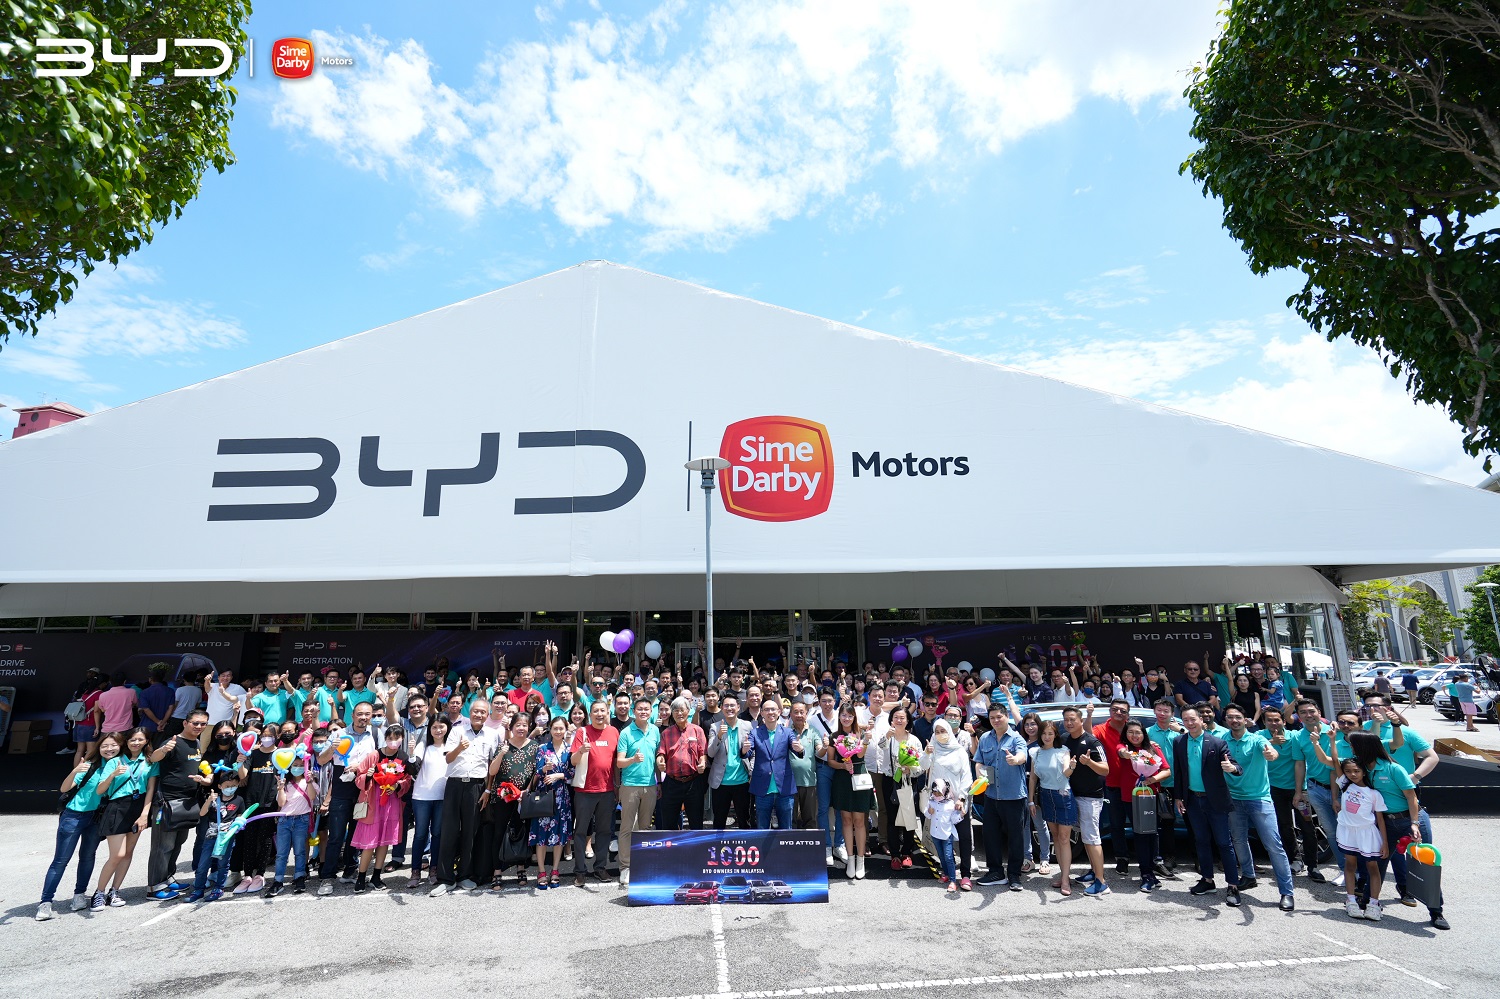 sime darby motors delivers 1,000 byd evs to customers at the same time